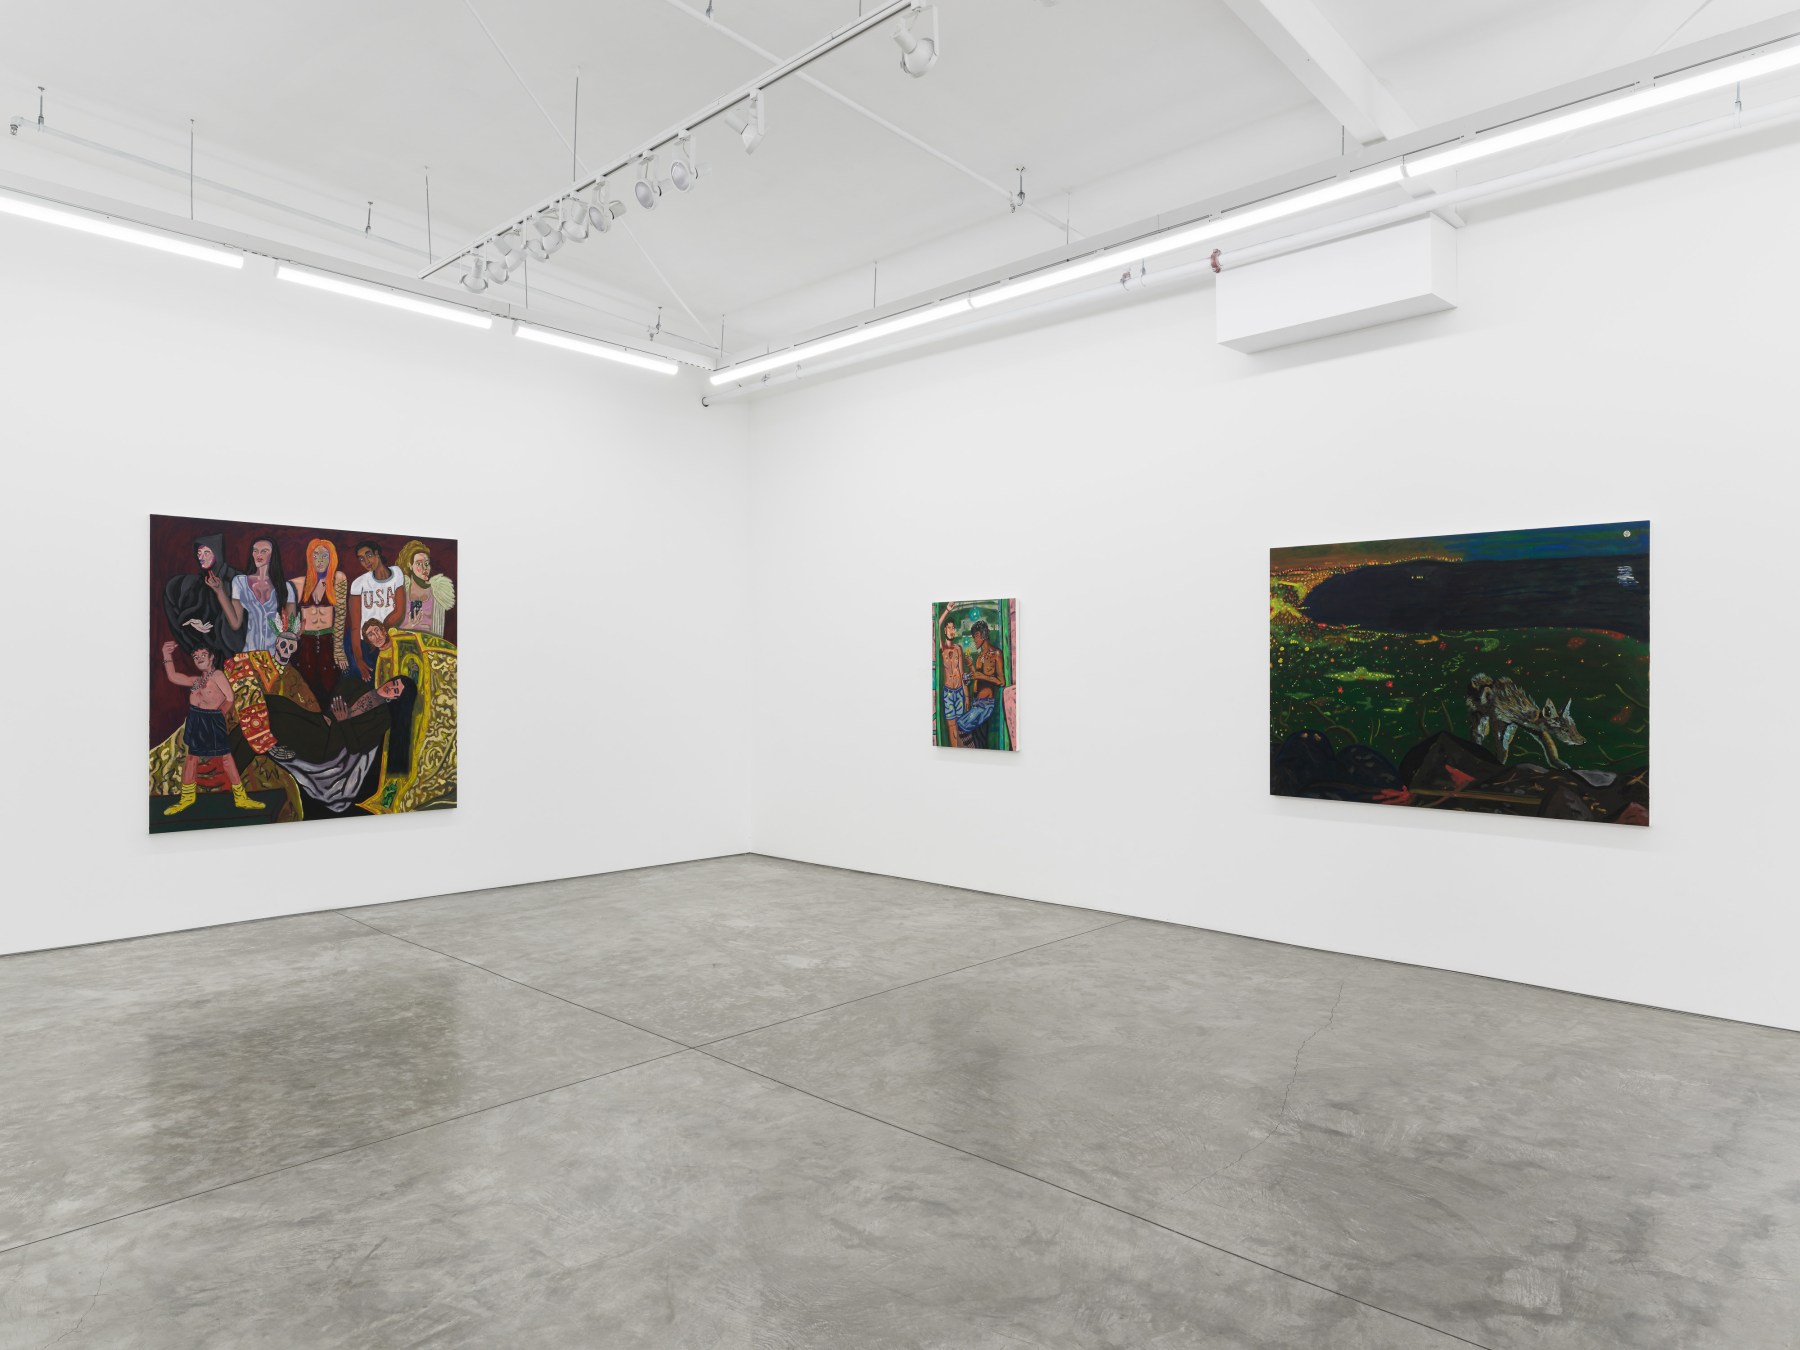 Installation view of Marcel Alcalá's exhibition "The Performance of Being" at Night Gallery 2023